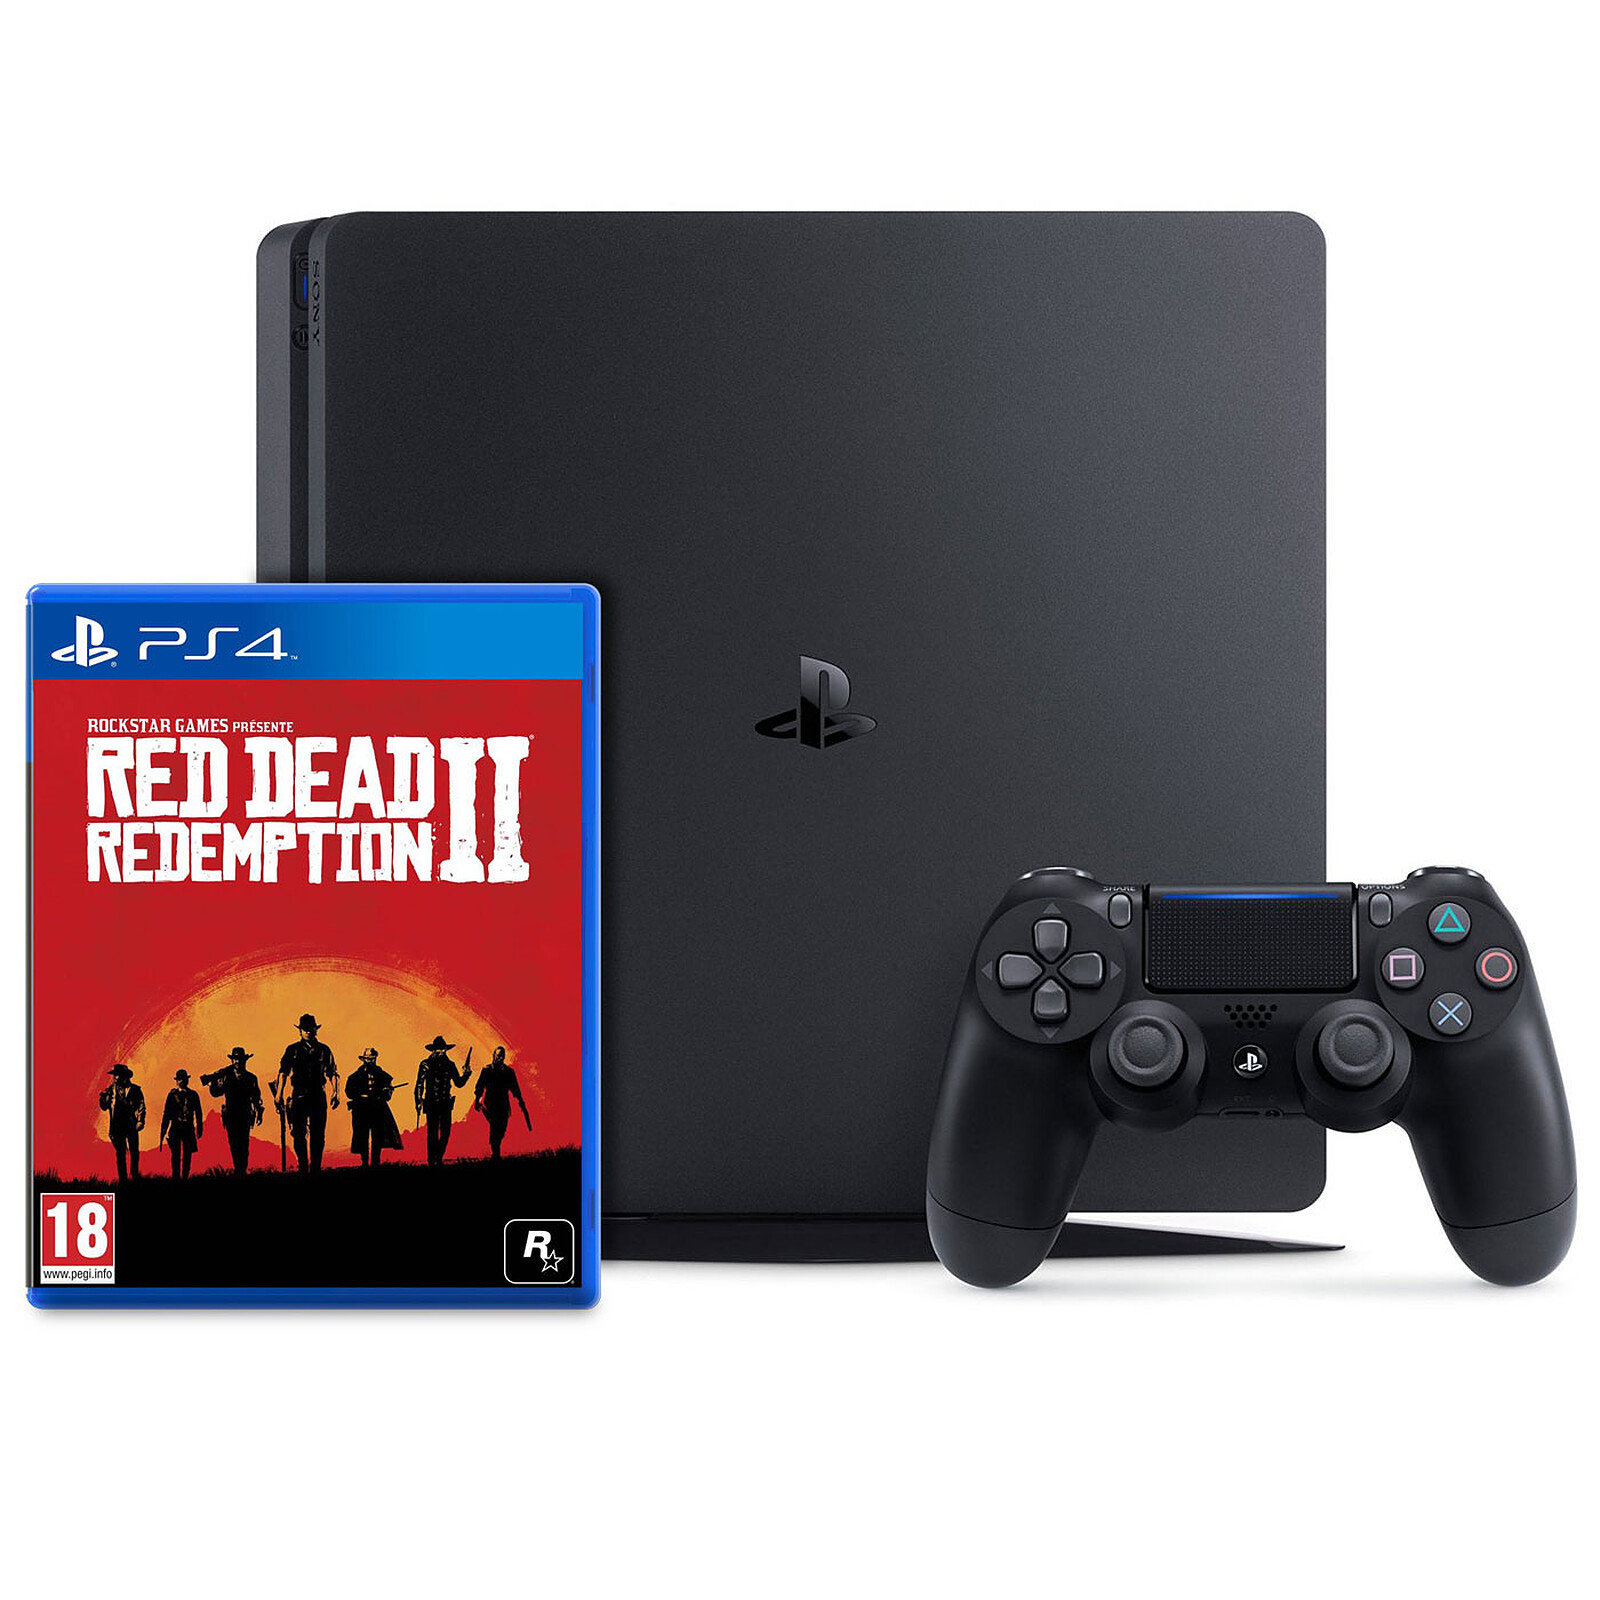 Juego Playstation 4 Red Dead Redemption PS4